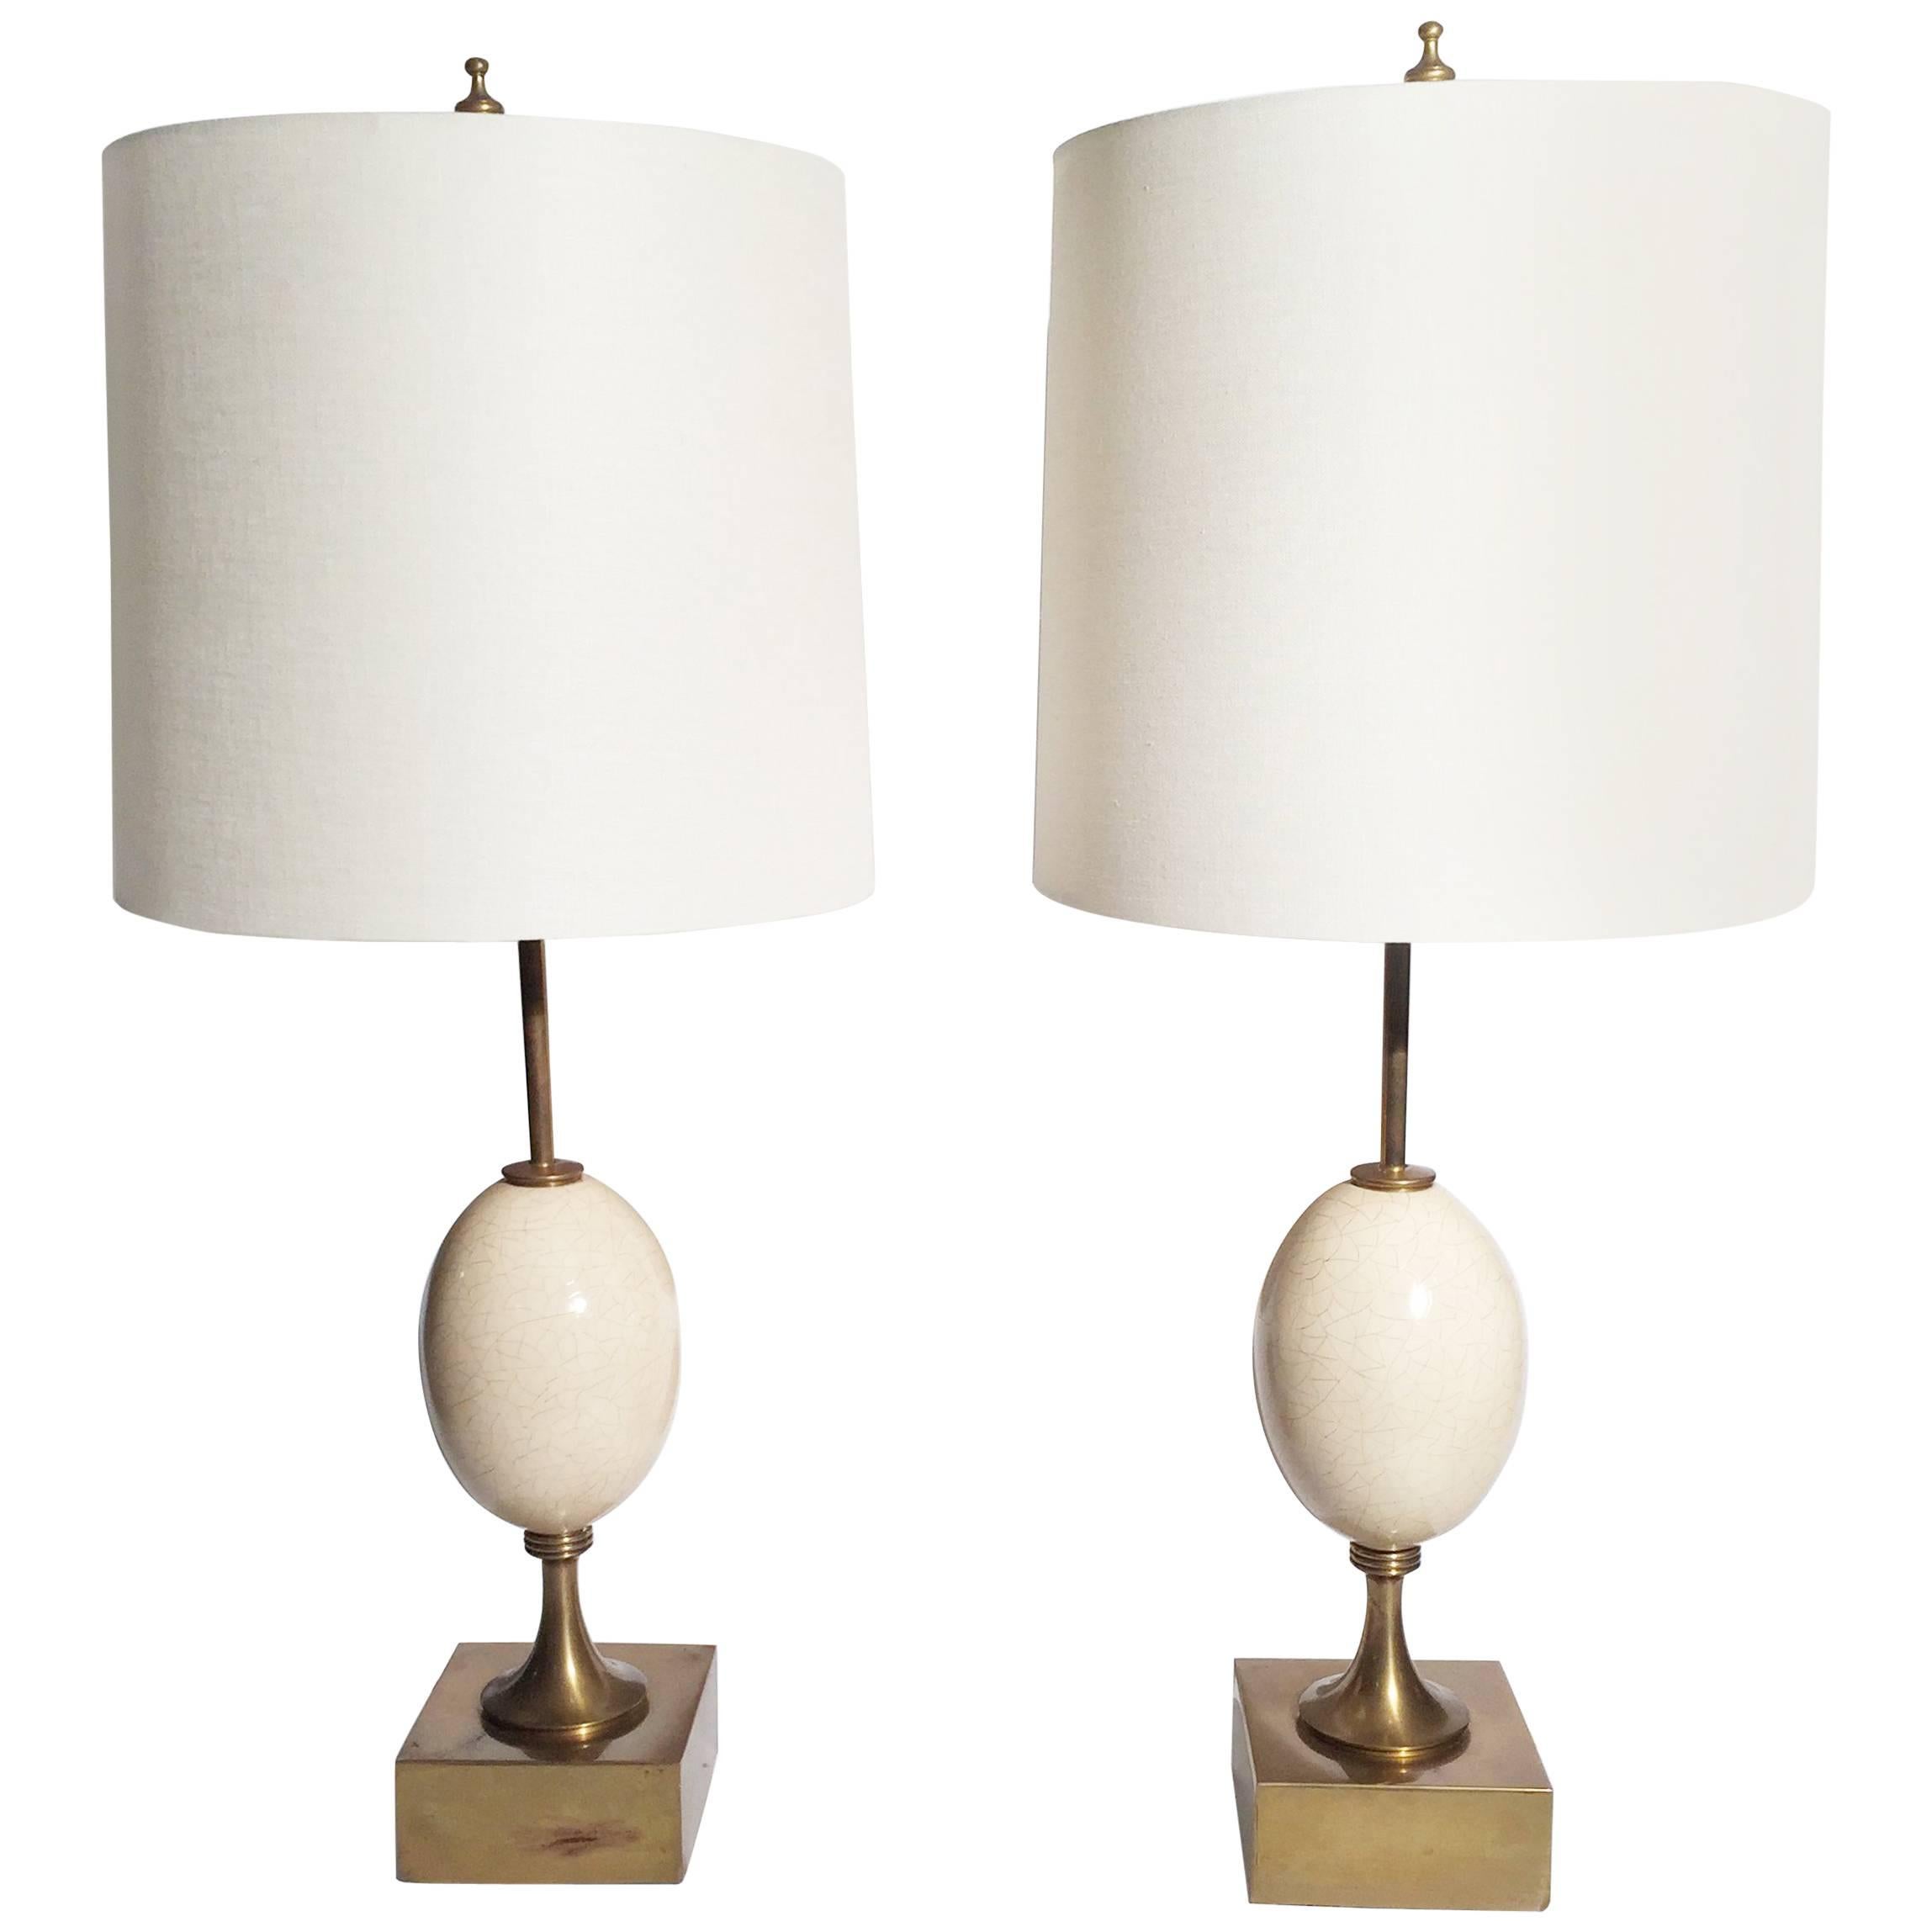 Pair of Ostrich Egg Lamps